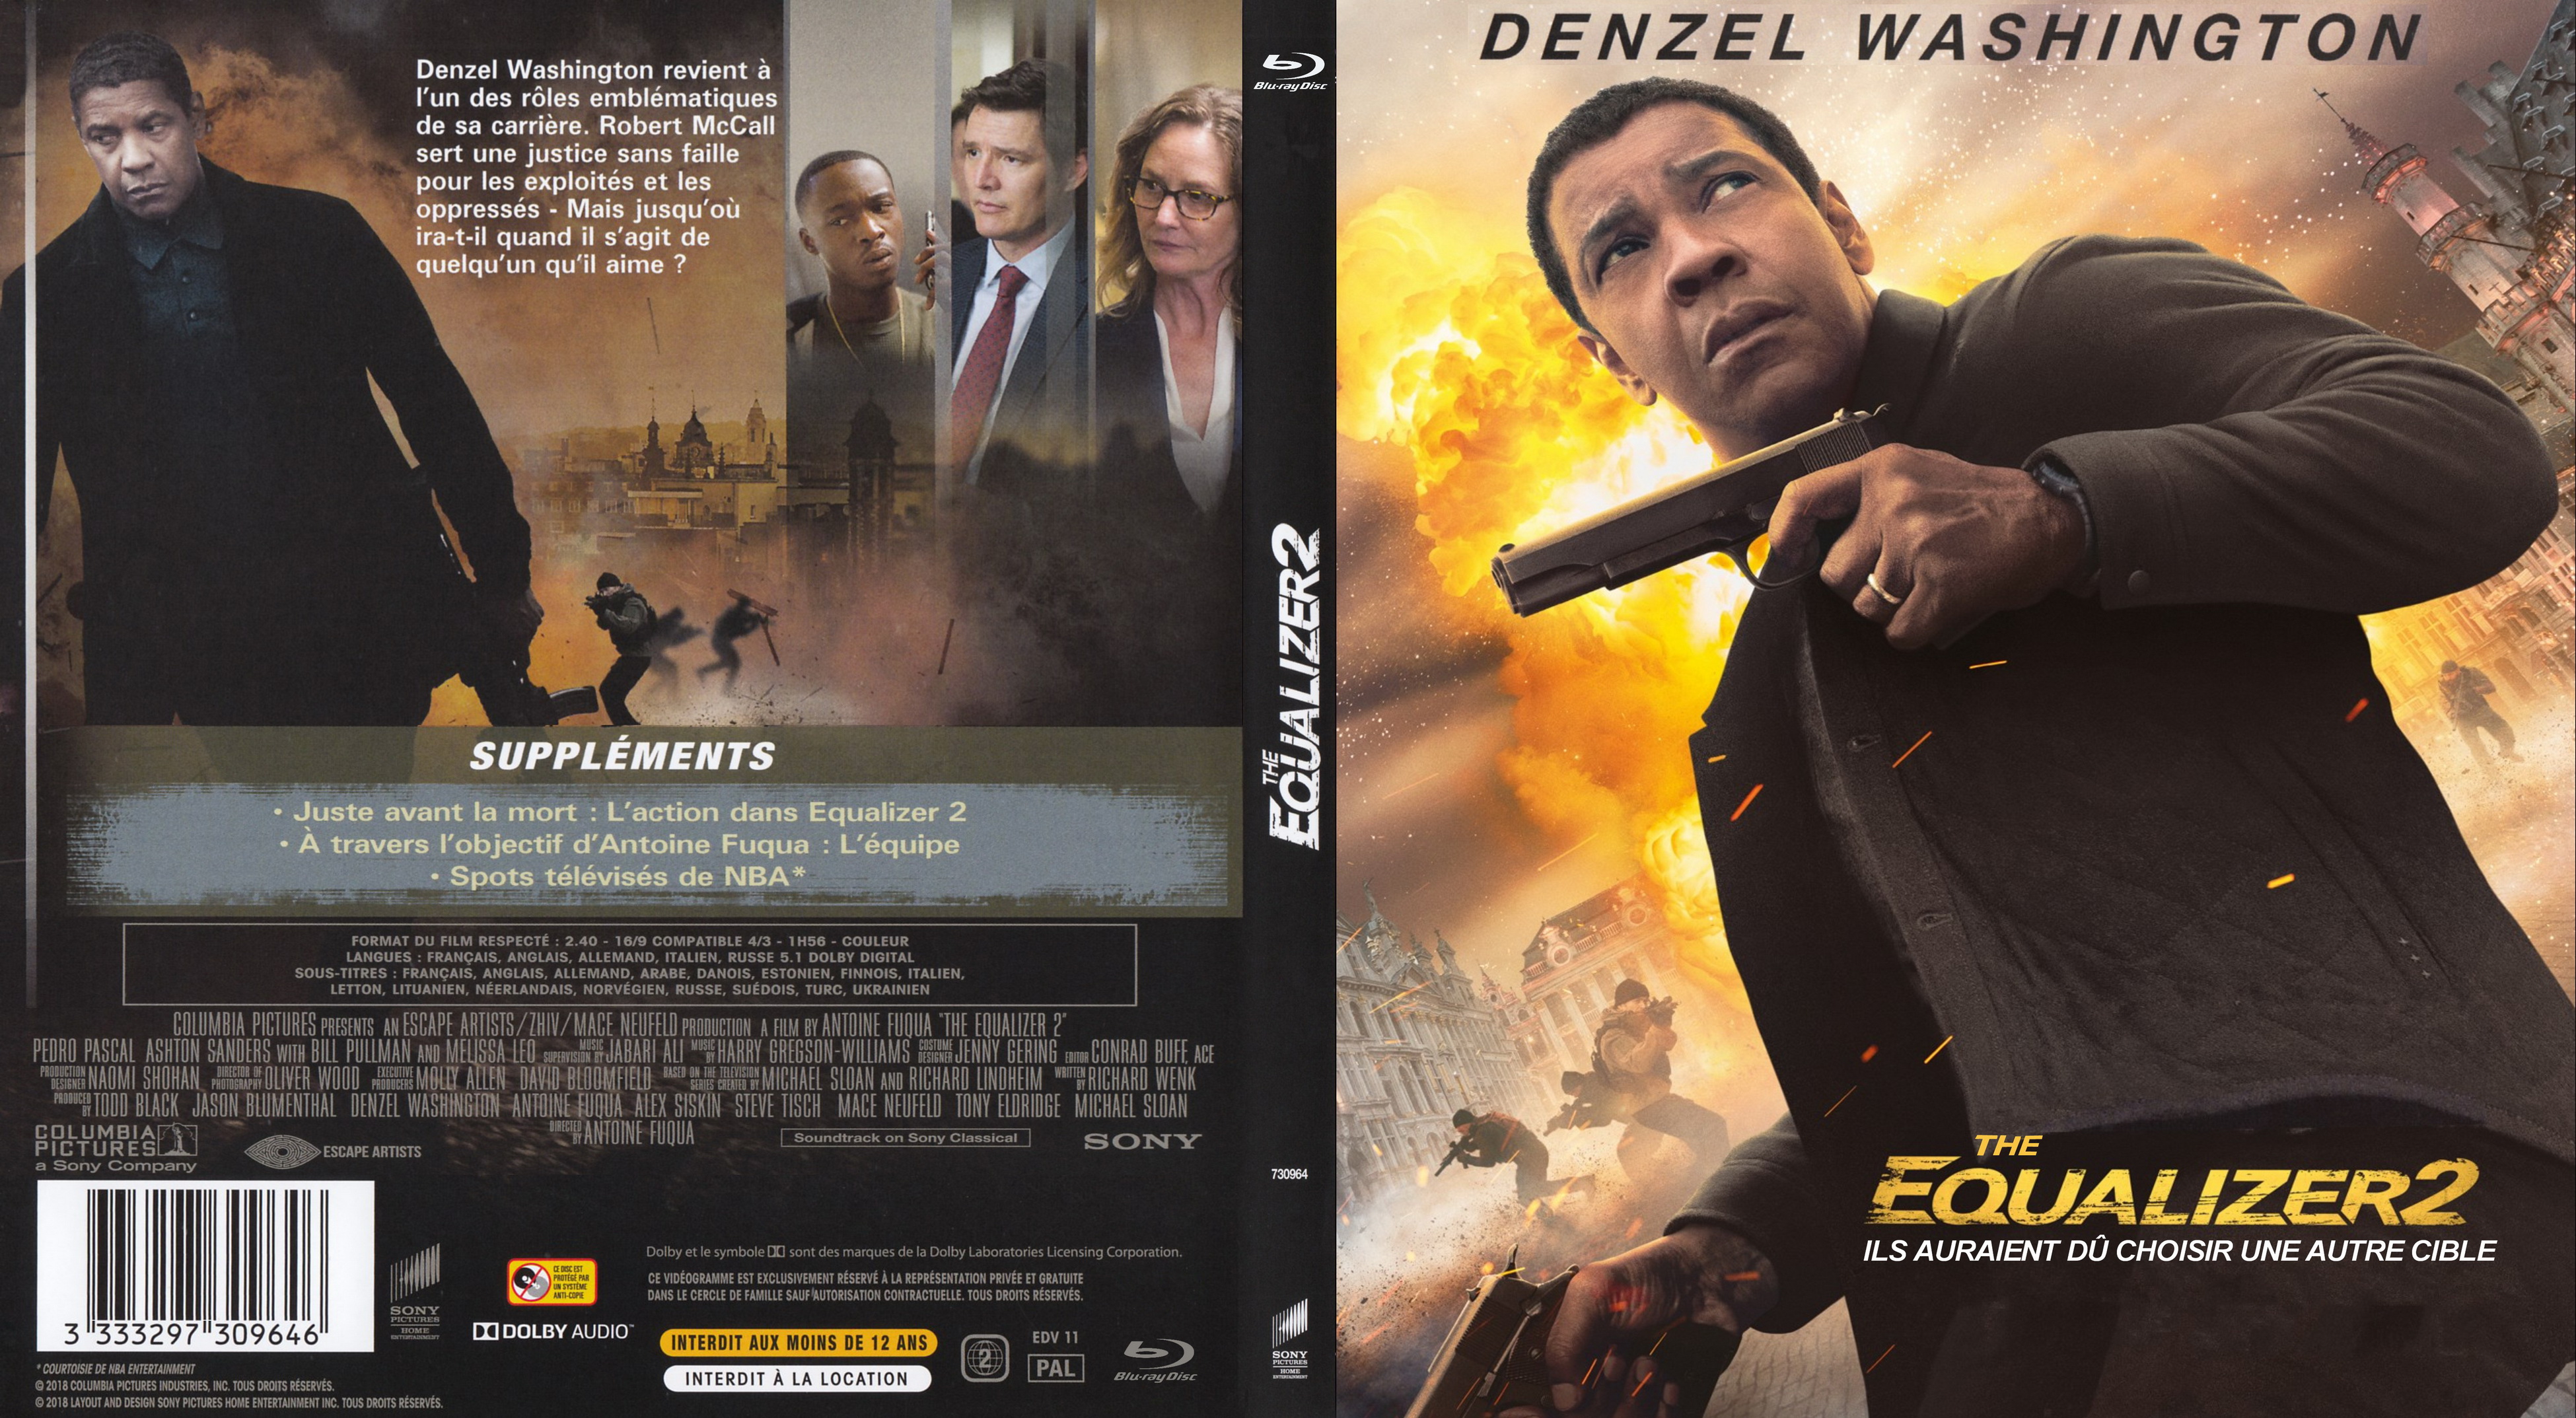 Jaquette DVD The equalizer 2 (BLU-RAY)